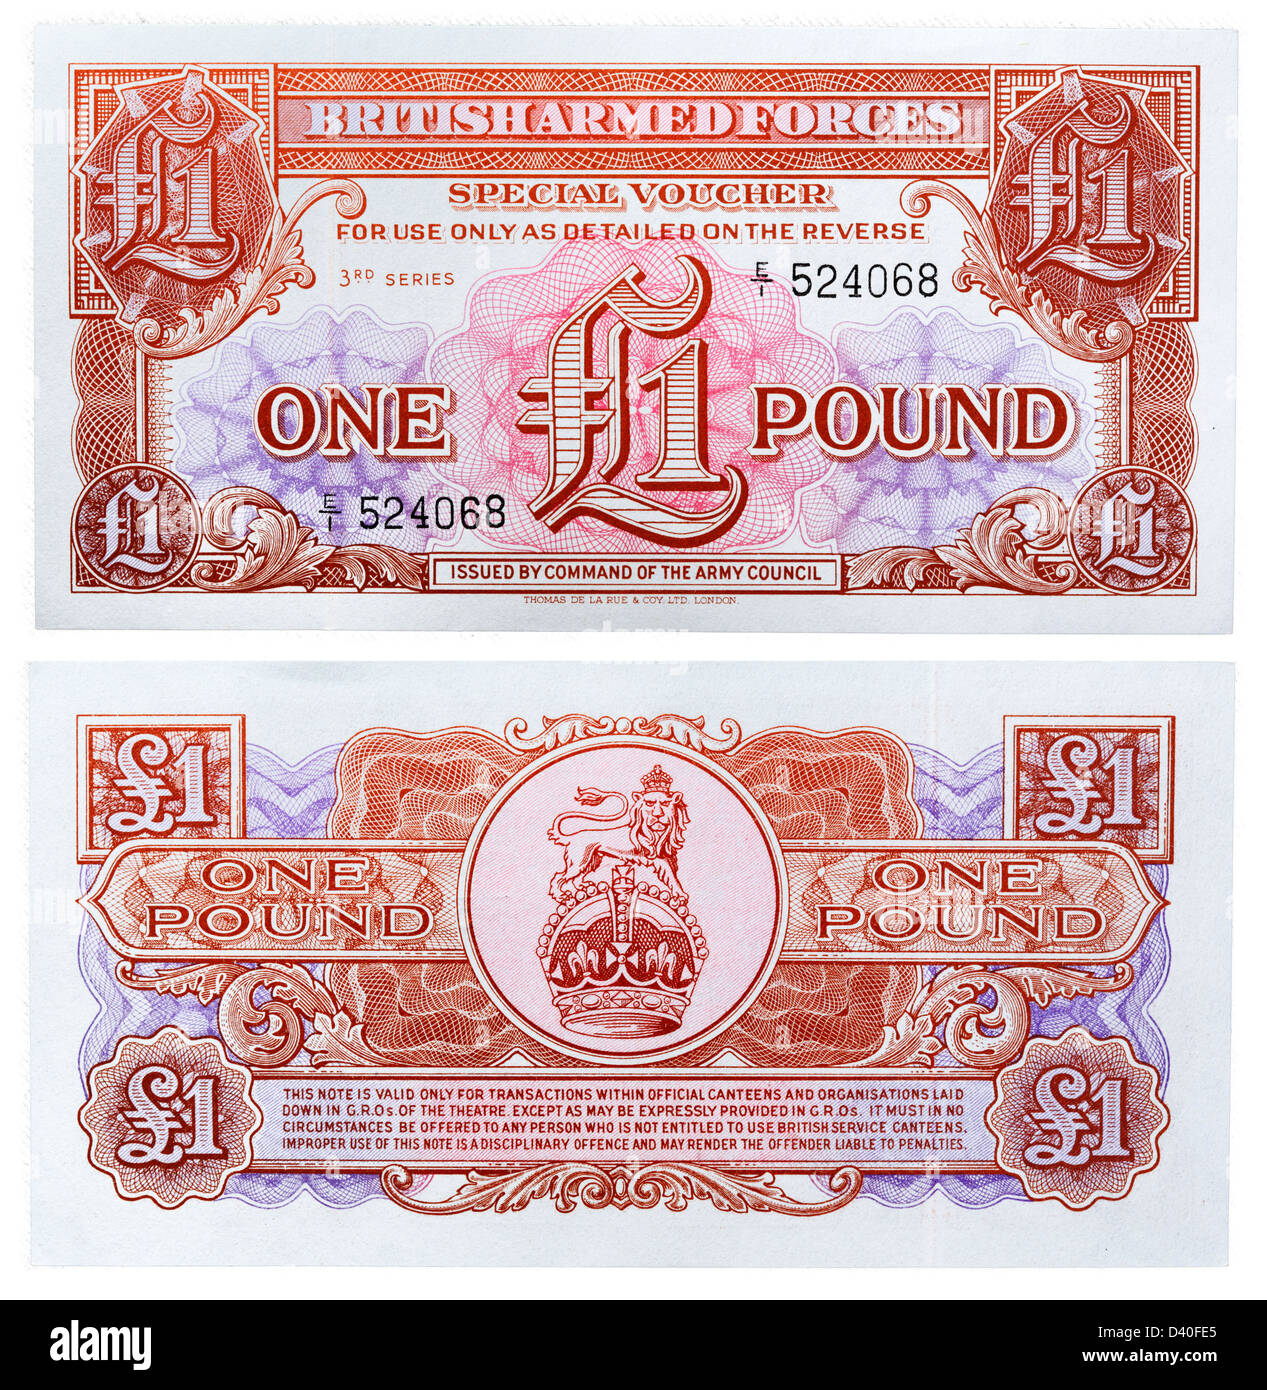 1 Pfund Banknote, UK, British Armed Forces, 1956 Stockfoto